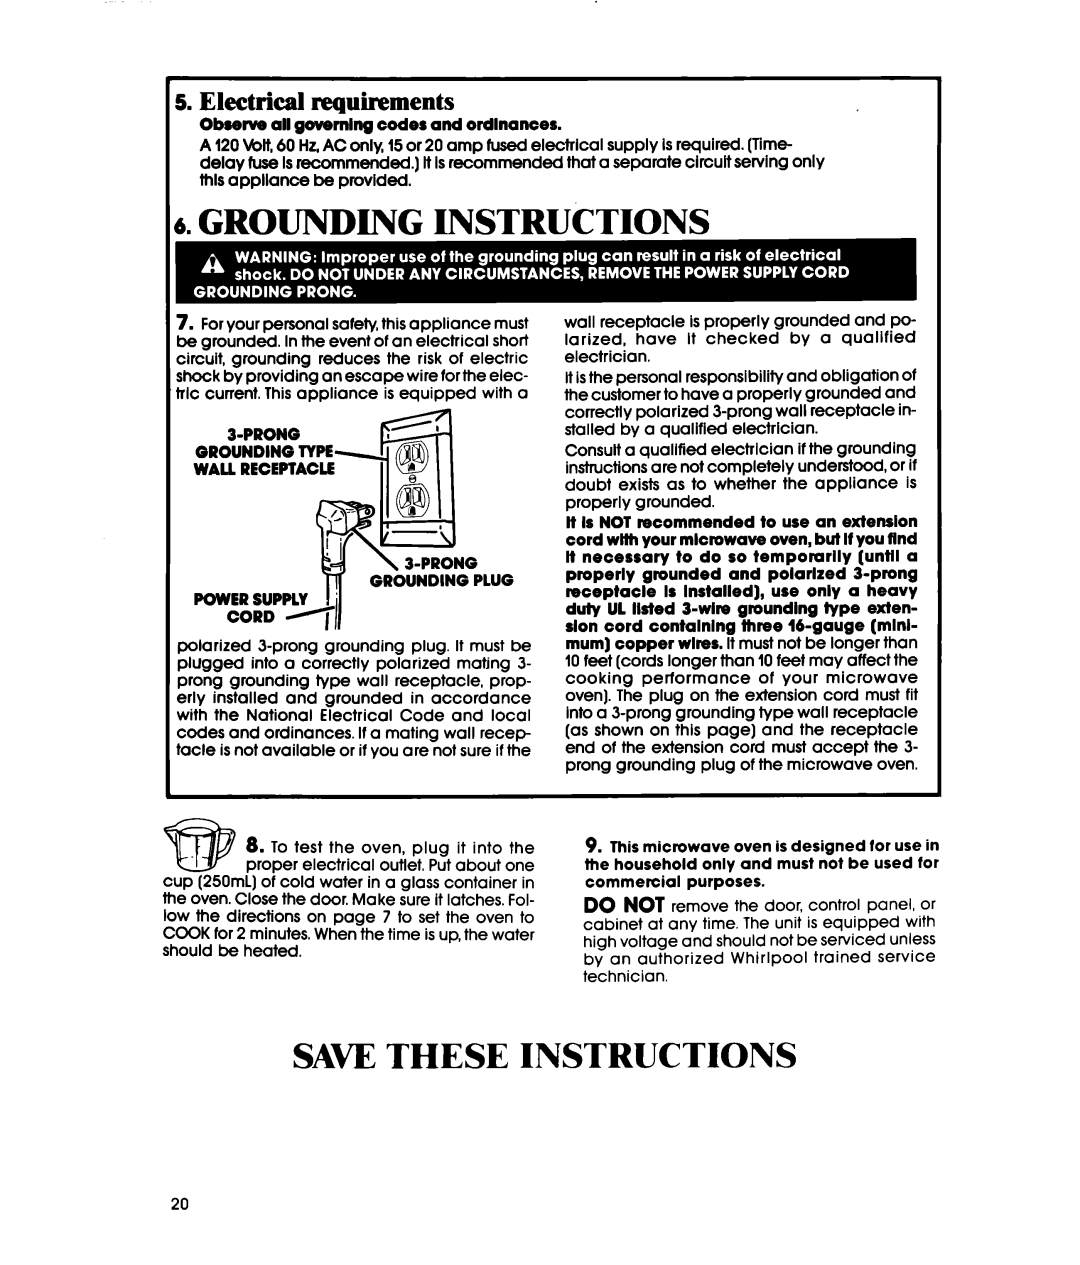 Whirlpool MW3500XS manual b.GROUNDING INSTRUCTIONS, Electrical requirements, Saw These Instructions, rO pw5j 